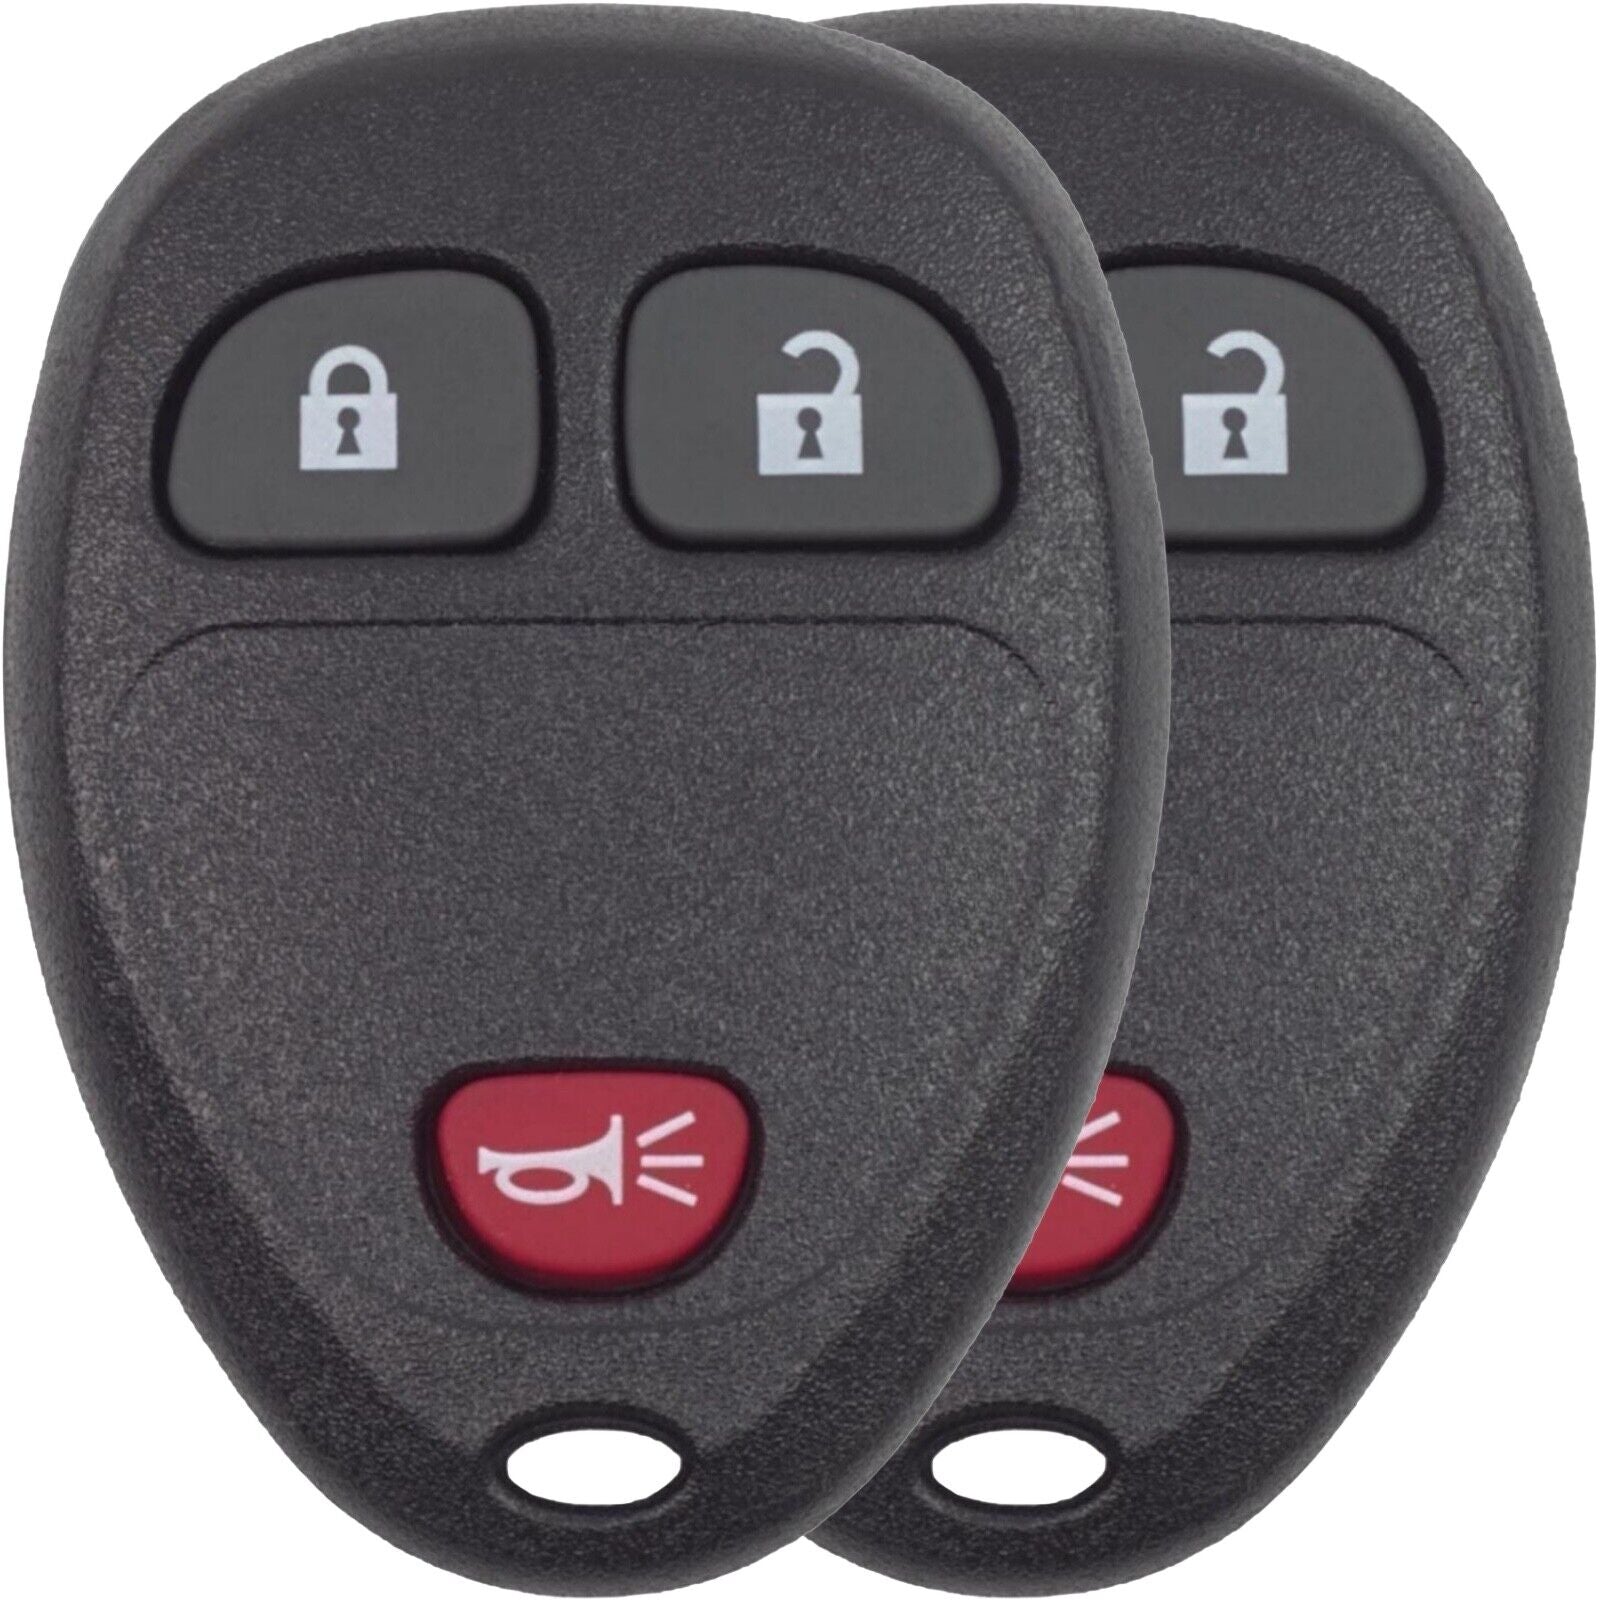 Key Fob Replacement For 2005-2007 Saturn Relay FCC ID: KOBGT04A